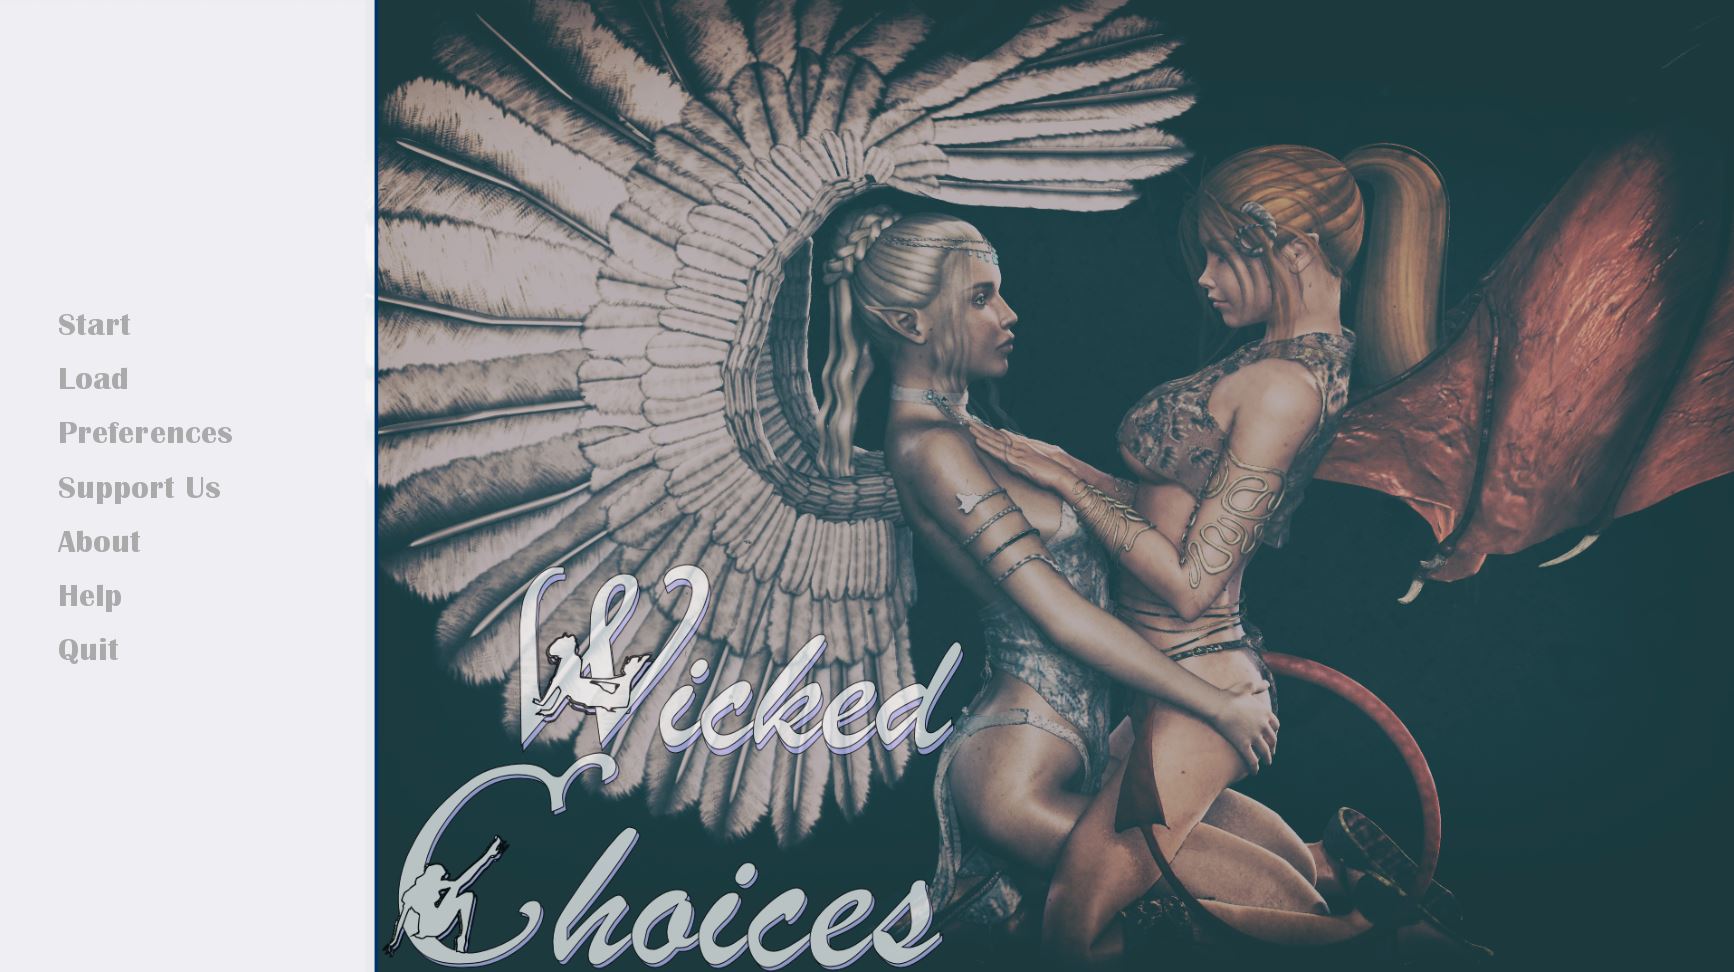 Wicked Choices – Version 1.0 - Patreon incest hentai game 6